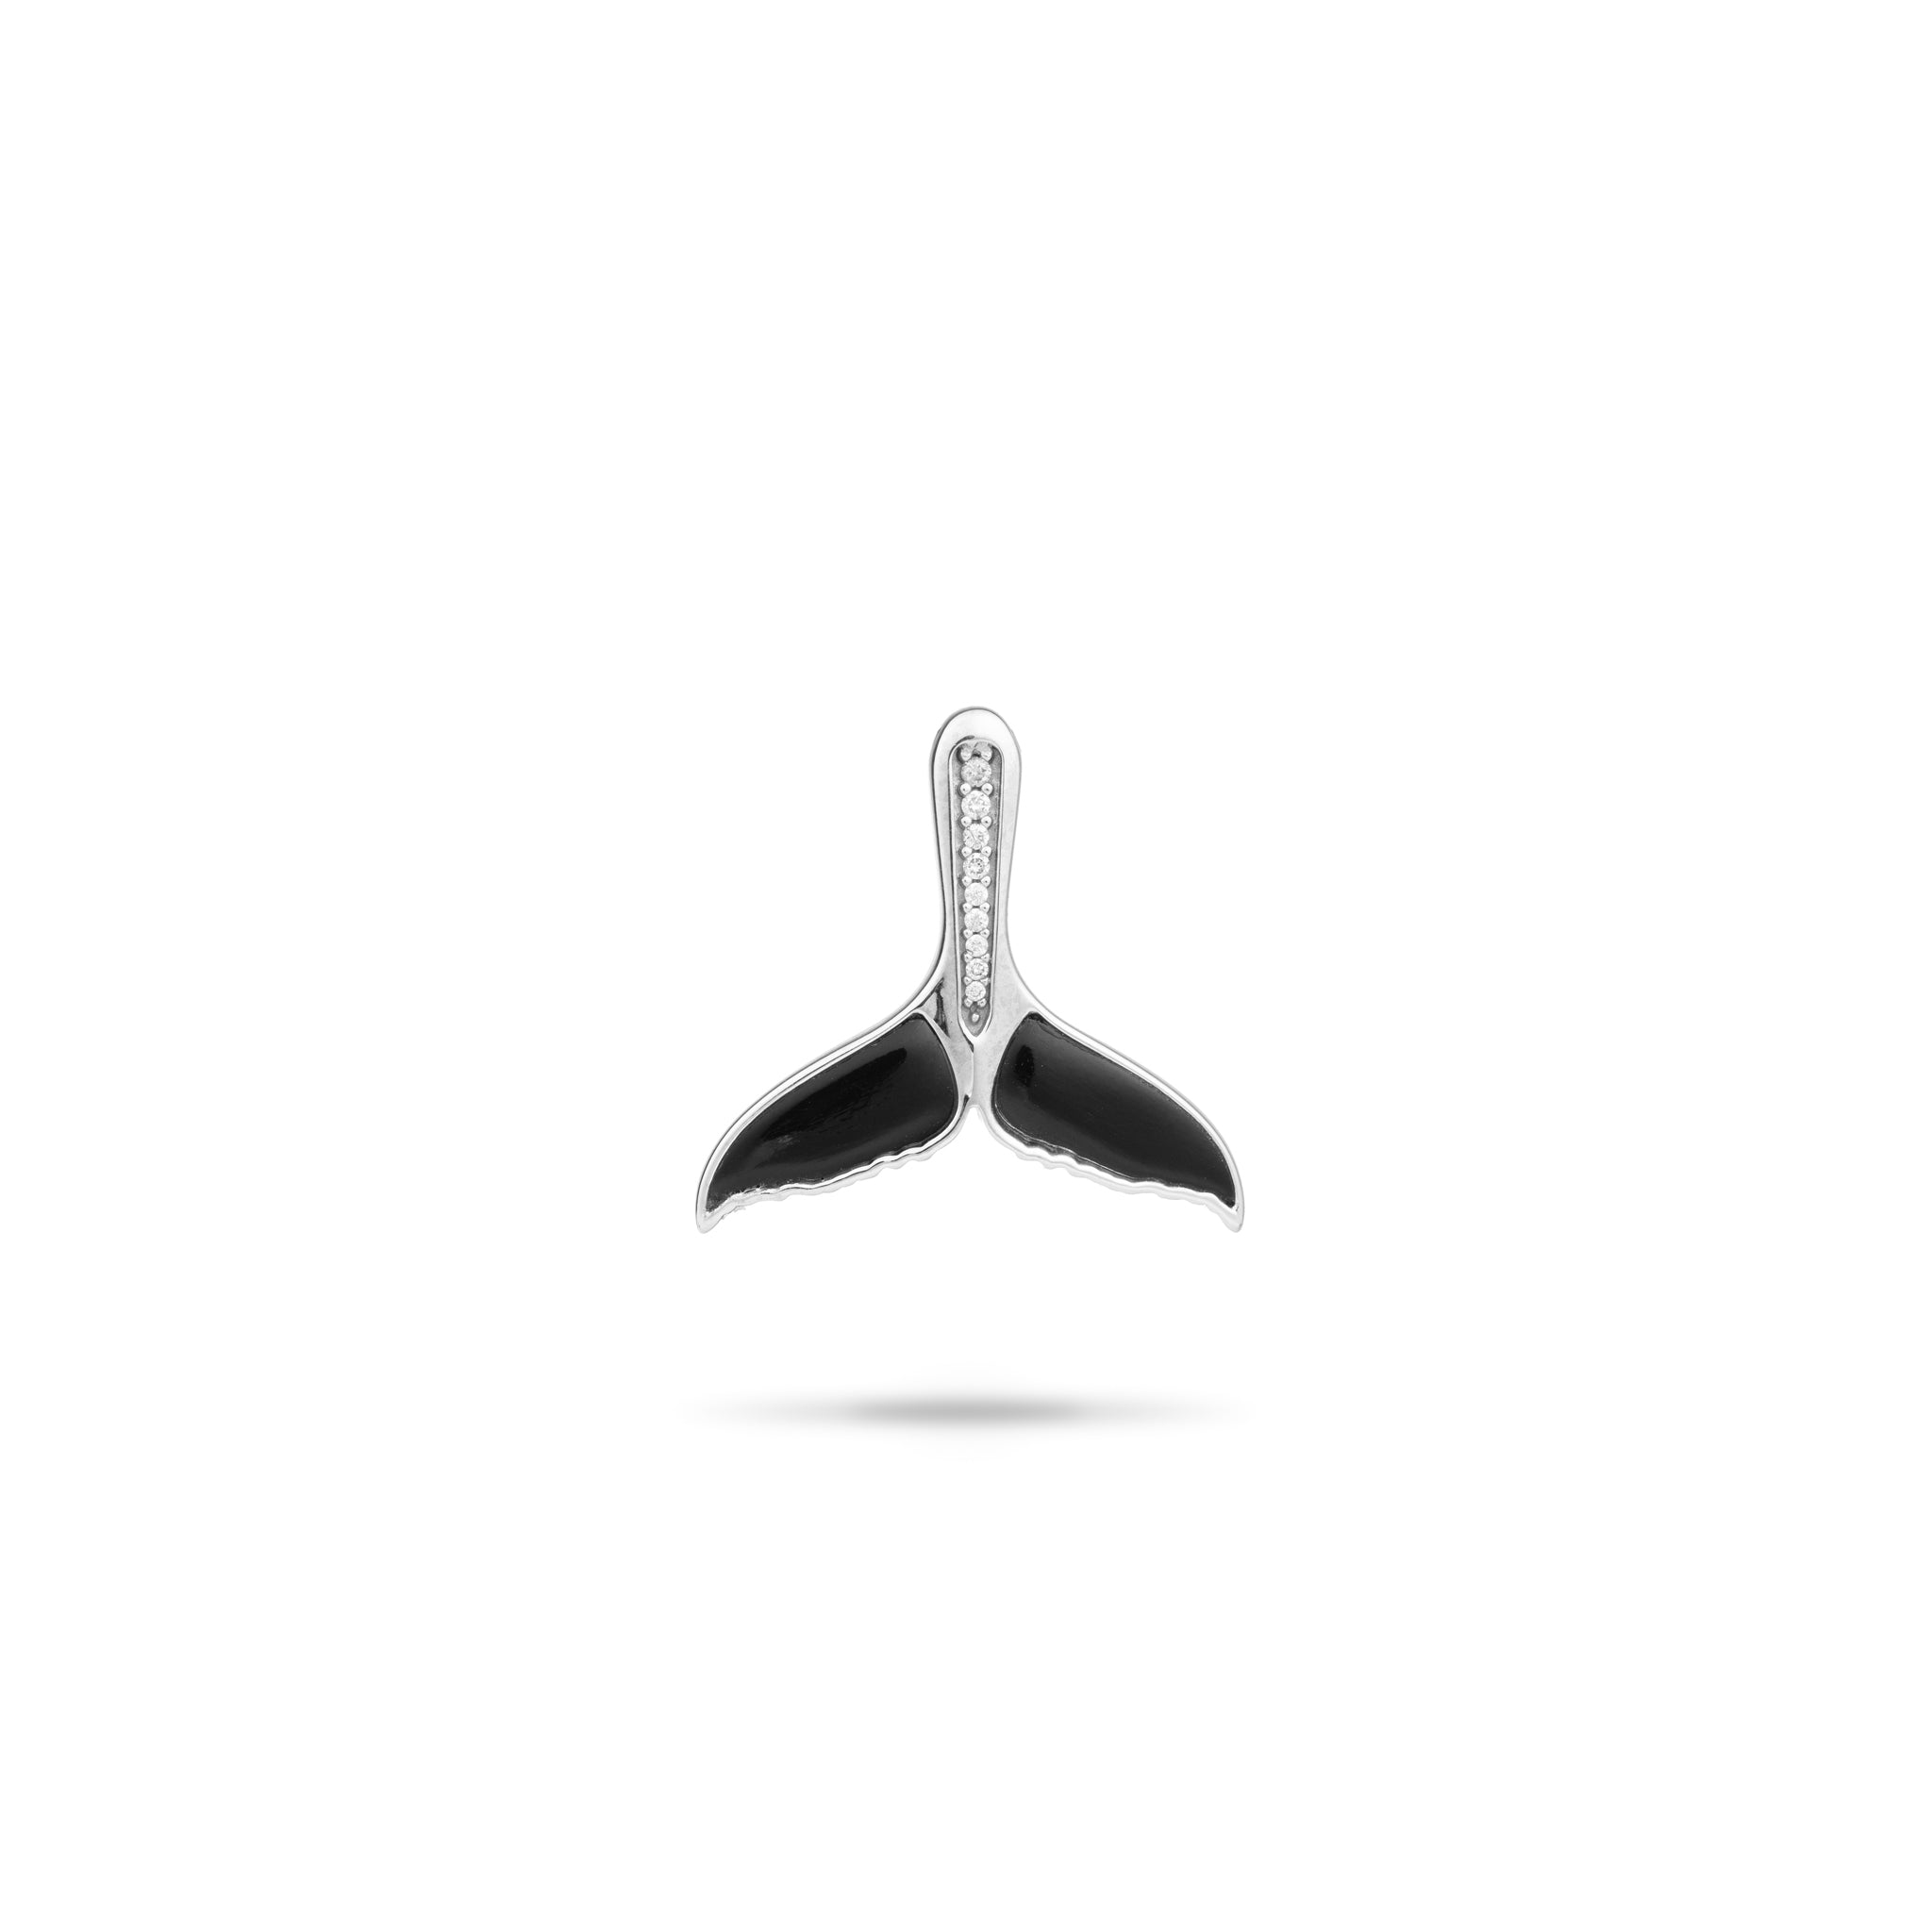 Sealife Whale Tail Black Coral Pendant in White Gold with Diamonds - 22mm